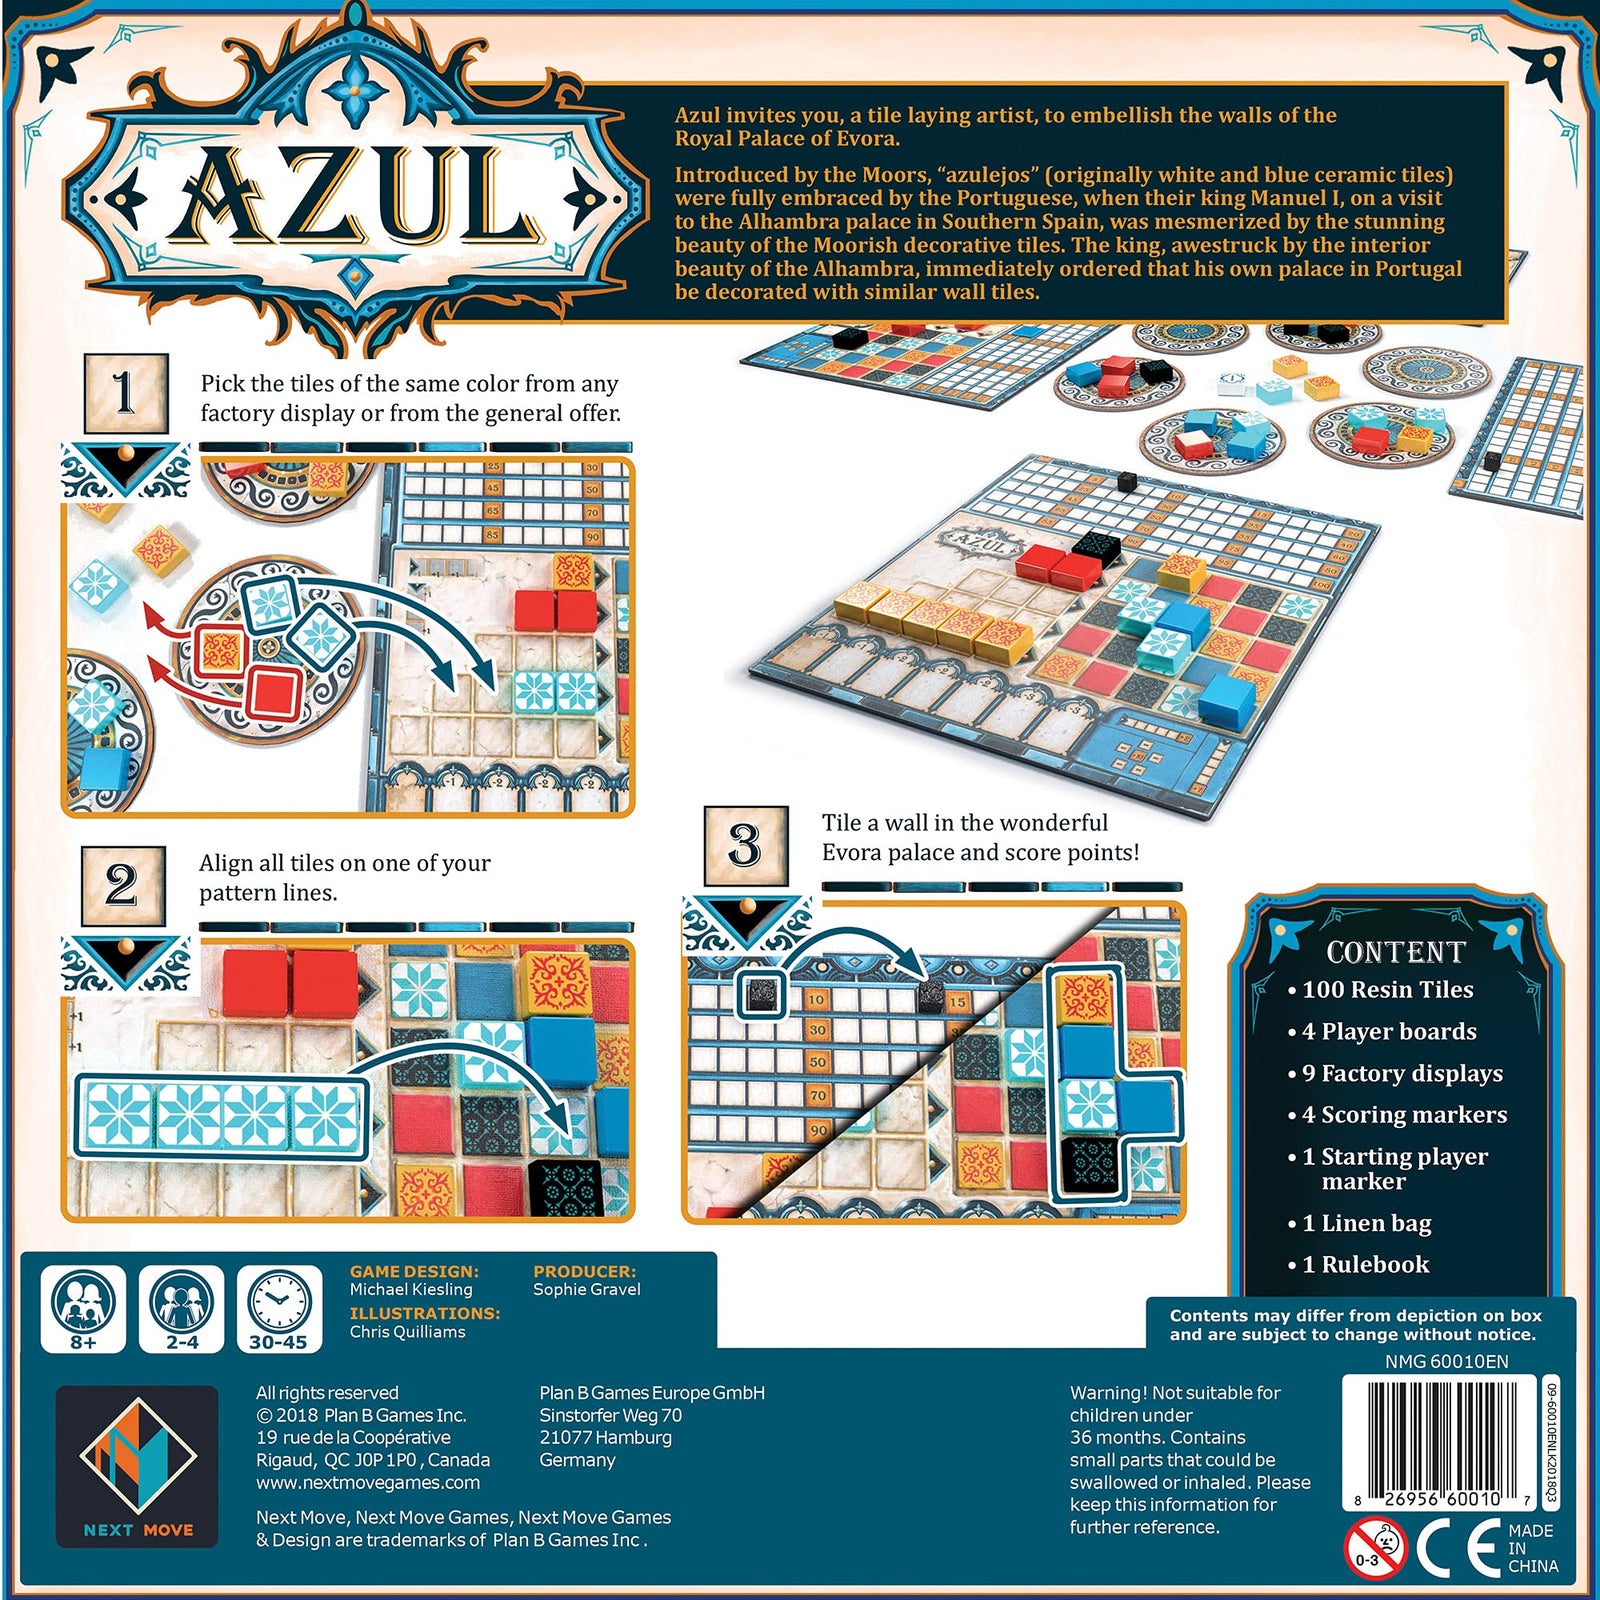 Azul Board Game | Strategy Board Game | Mosaic Tile Placement Game | Family Board Game for Adults and Kids | Ages 8 and up | 2 to 4 Players | Average Playtime 30 - 45 Minutes | Made by Next Move Games